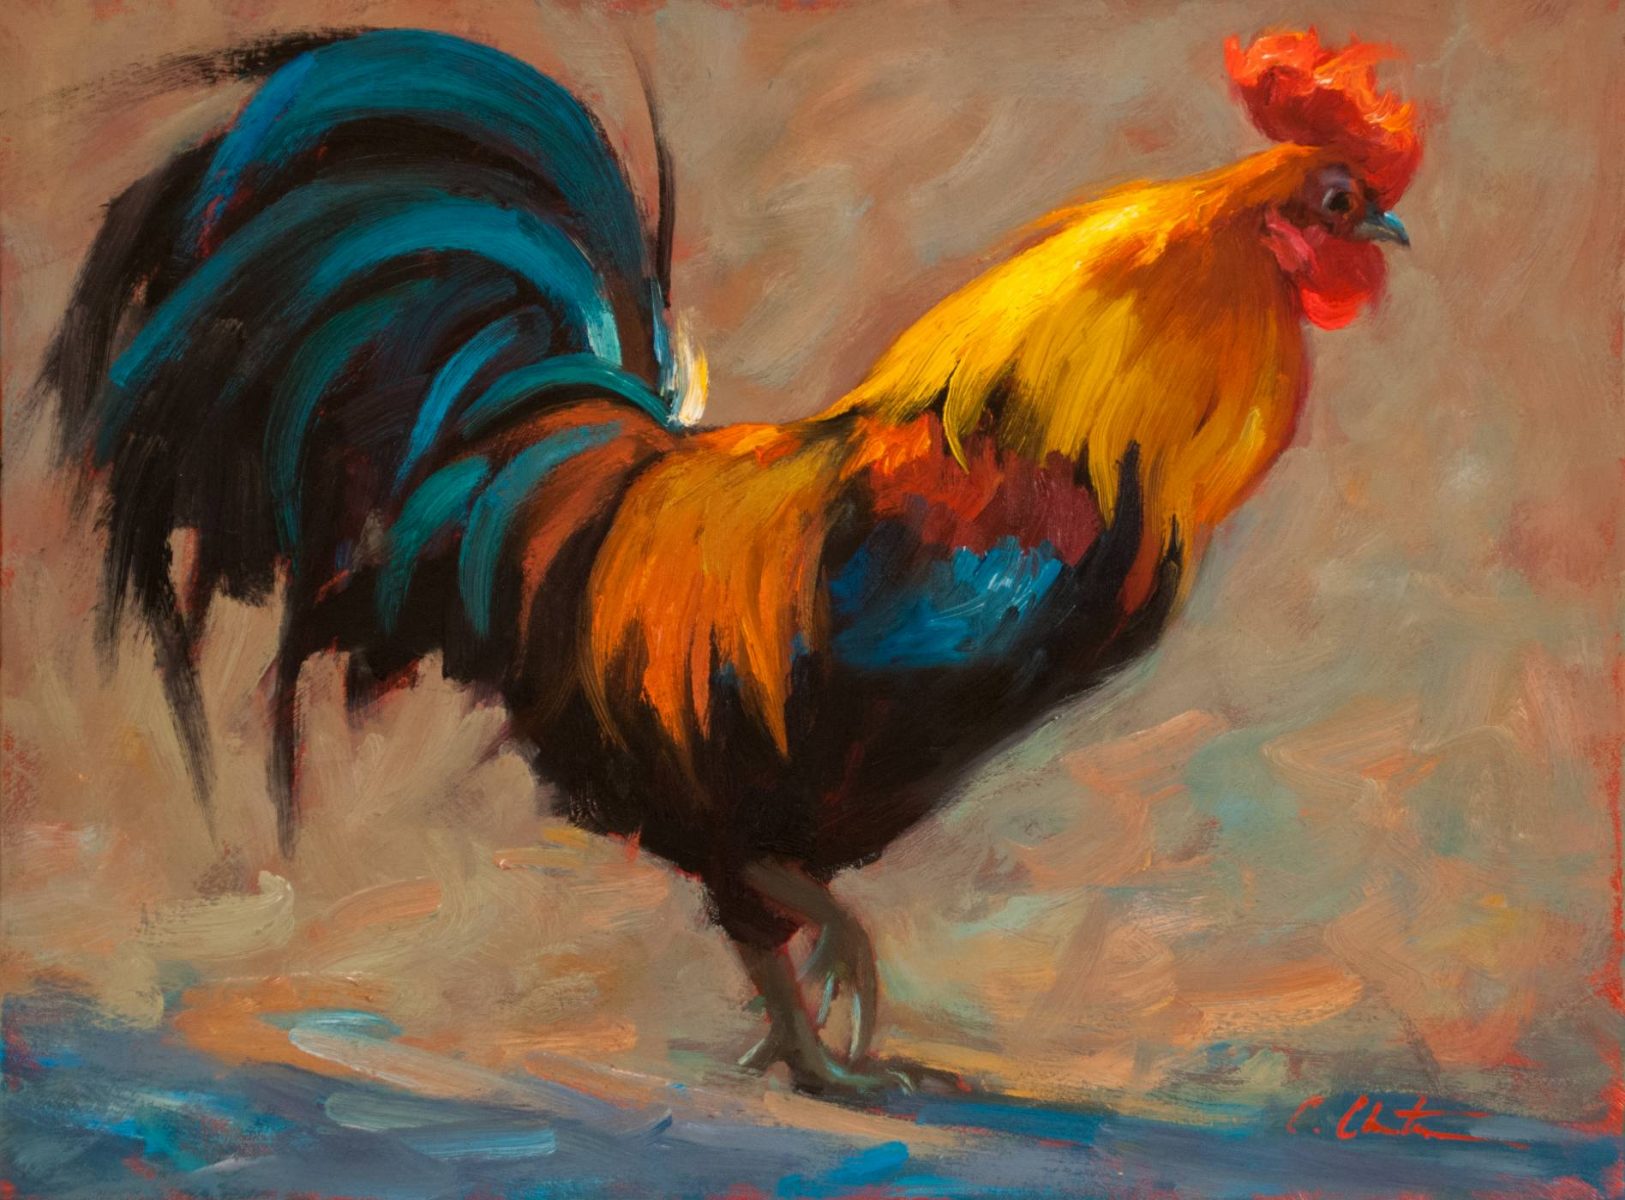 painting of a rooster by Texas artist Cheri Christensen